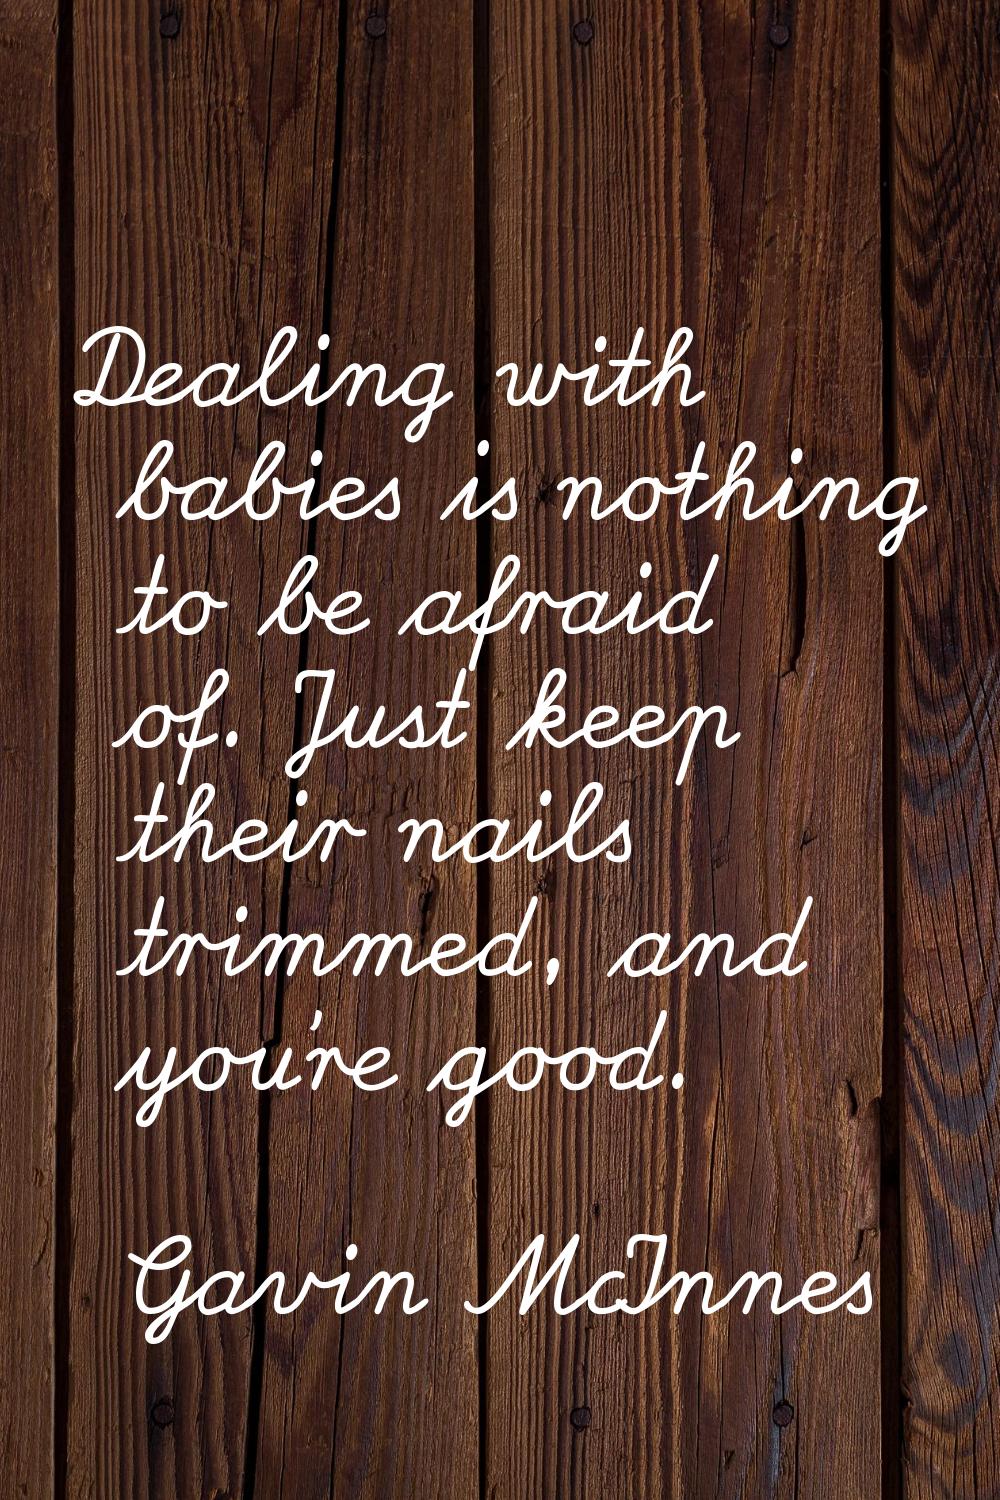 Dealing with babies is nothing to be afraid of. Just keep their nails trimmed, and you're good.